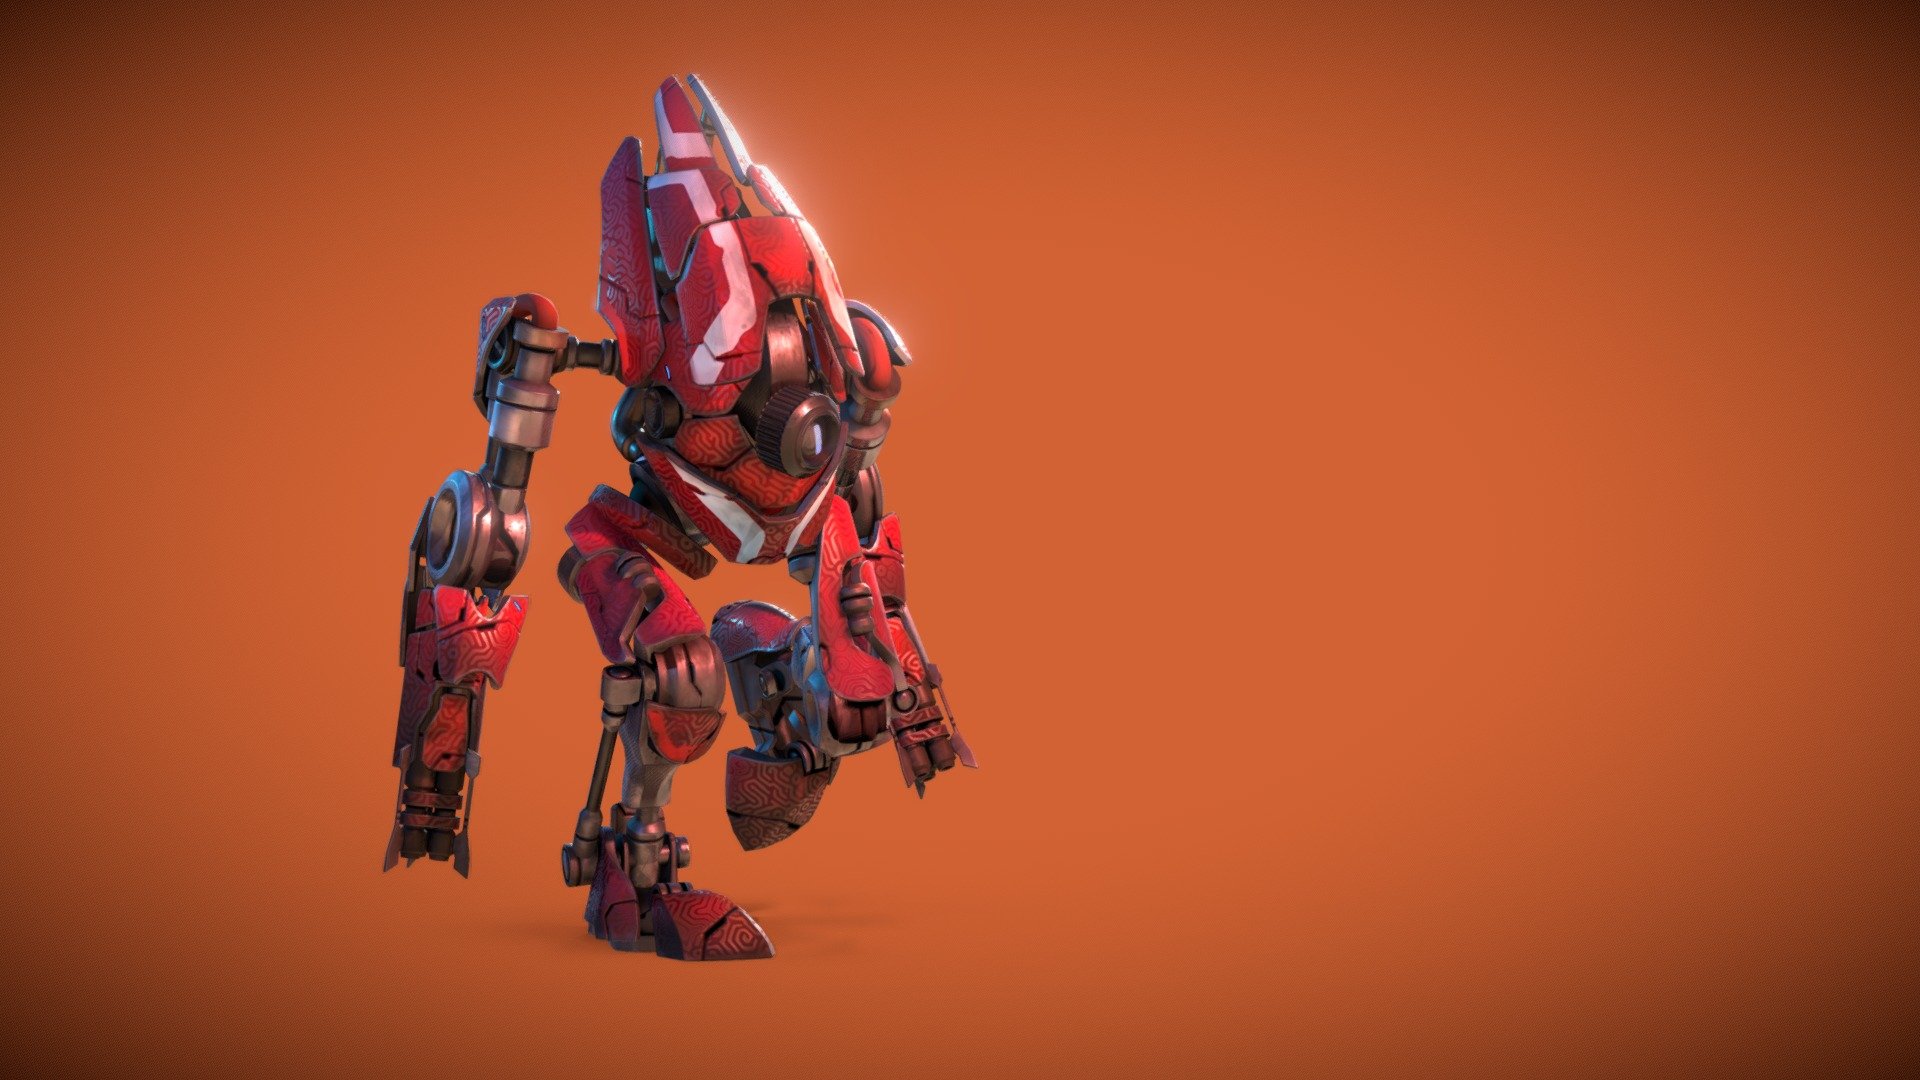 You'll get 4 skins, PBR/handpainted maps done in 3D-Coat (Basic/Watcher/Protector/Solarus), FBX with &amp; without skeleton, Akeytsu files ready to animate with the fully rigged character and another with VFX. Get the software here : https://www.nukeygara.com/try ;)

The model is realtime ready so you can export it anywhere on realtime engines like UnrealEngine4/Unity/Marmoset. NormalMaps are Y- baked in MIKK TangentSpace, model use custom VerticesNormals so keep them at import ;)

Textures consists in 1 2K UVset, and uses combined map channels to reduce drawcalls (better performances). C1 maps combines : Red=Metalness ; Green=Roughness ; Blue=AO. C3 maps combines : Red=Cavity ; Green=EyeGlow Alpha ; Blue=Specular IntensityFor the global Emissive use the &ldquo;E